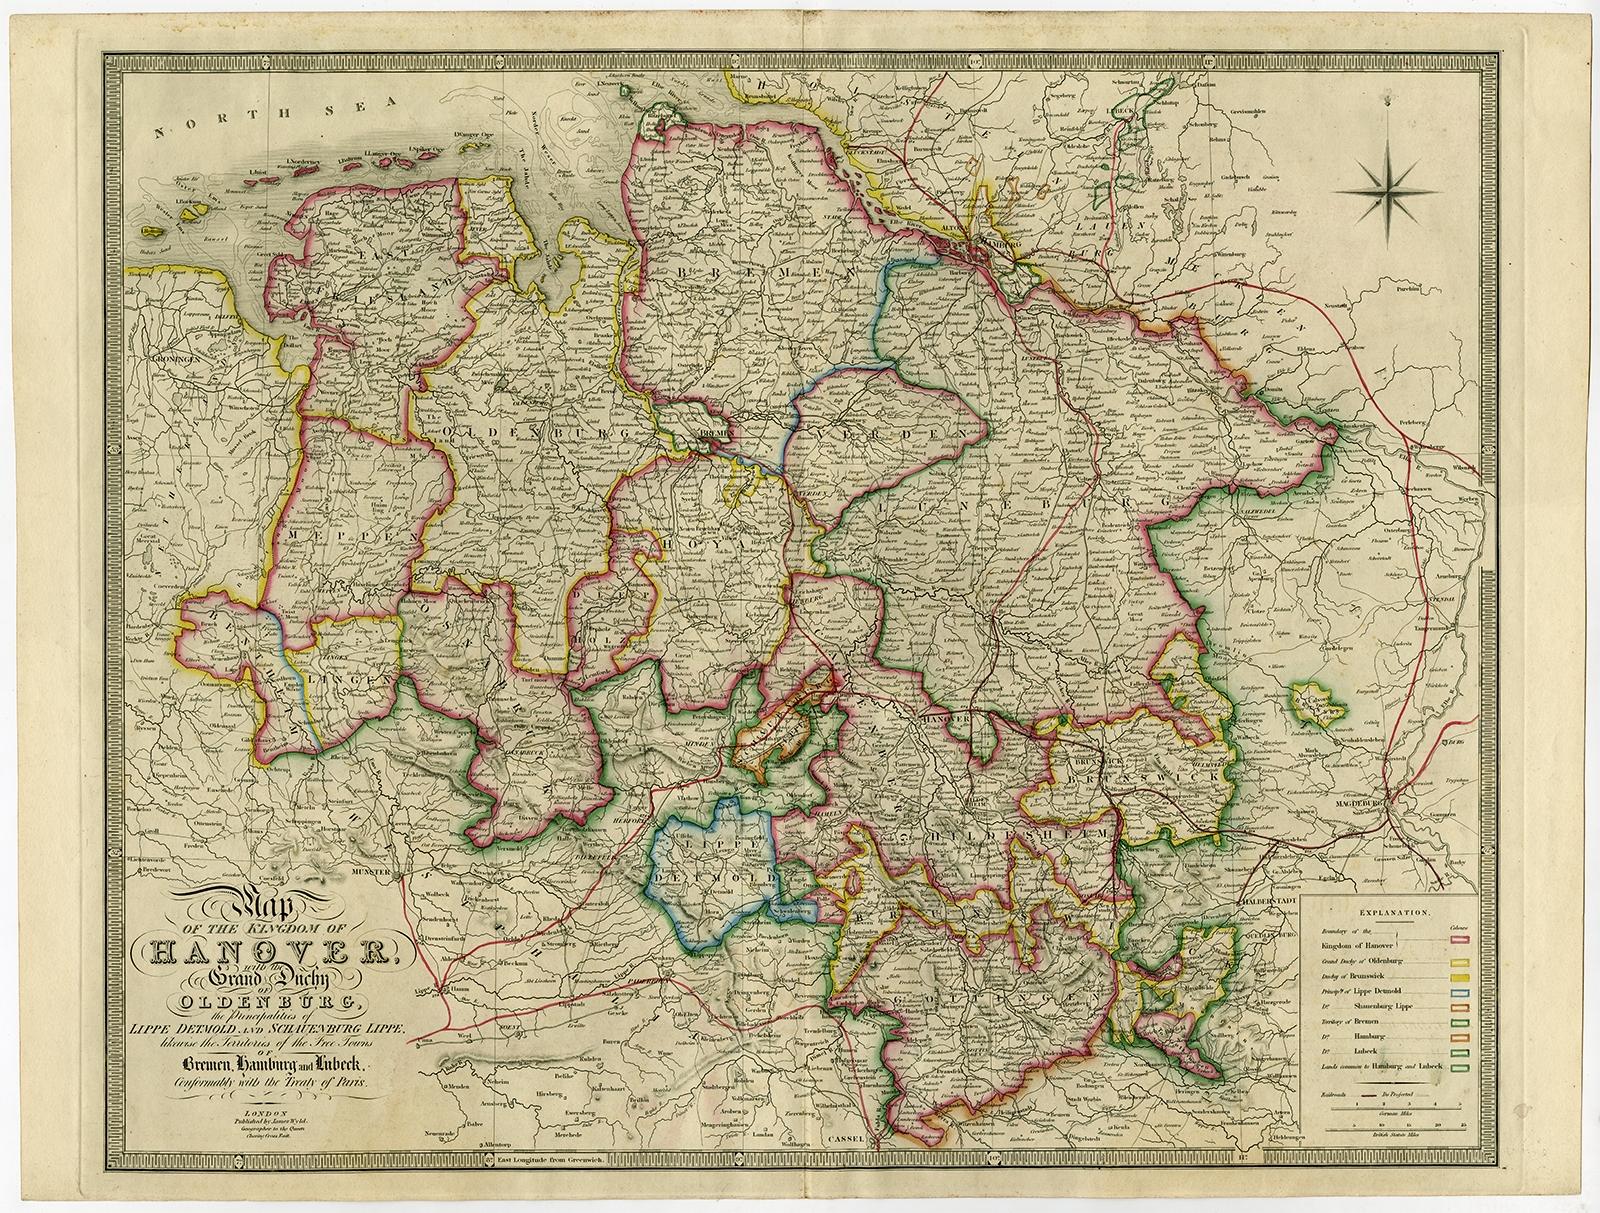 Antique map titled 'Map of the Kingdom of Hanover, with the Grand Duchy of Oldenburg, the principalities of Lippe Detmold and Schauenburg Lippe (..)'. 

Map of Northern Germany including Hanover, Oldenburg, Lippe, Bremen, Hamburg and Lubeck. From